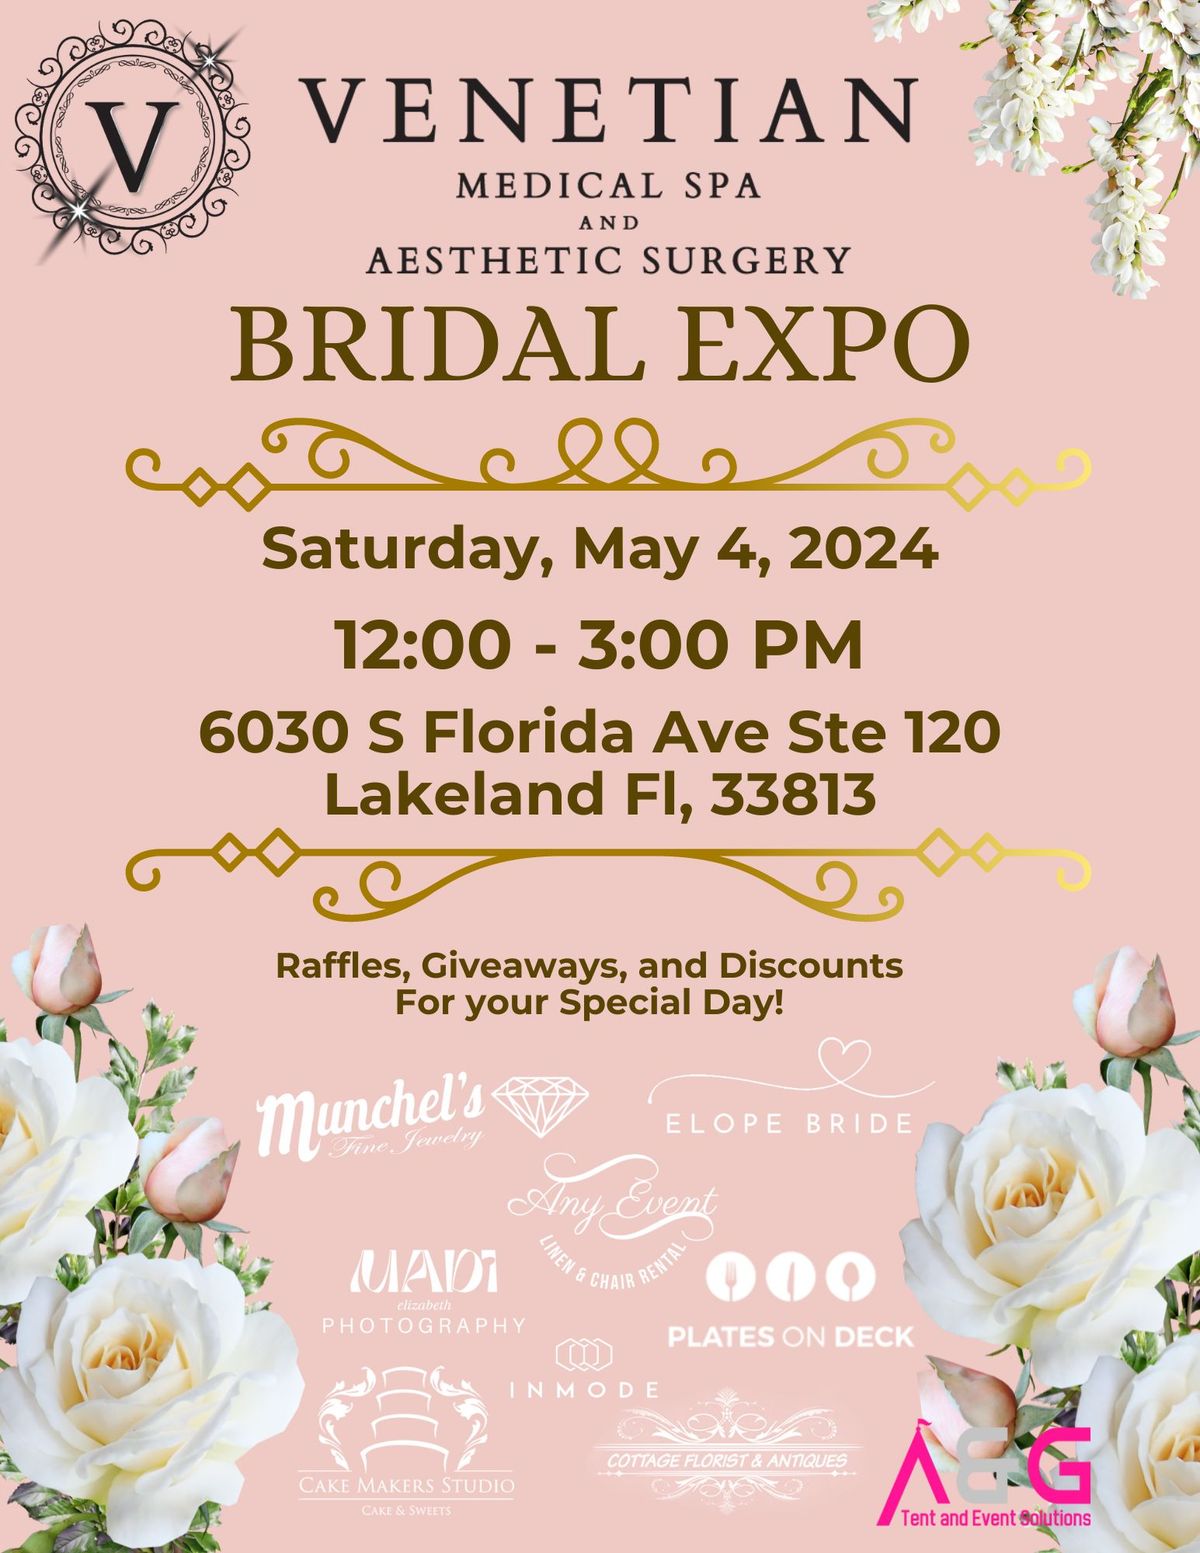 Bridal Expo hosted by Venetian Medical Spa